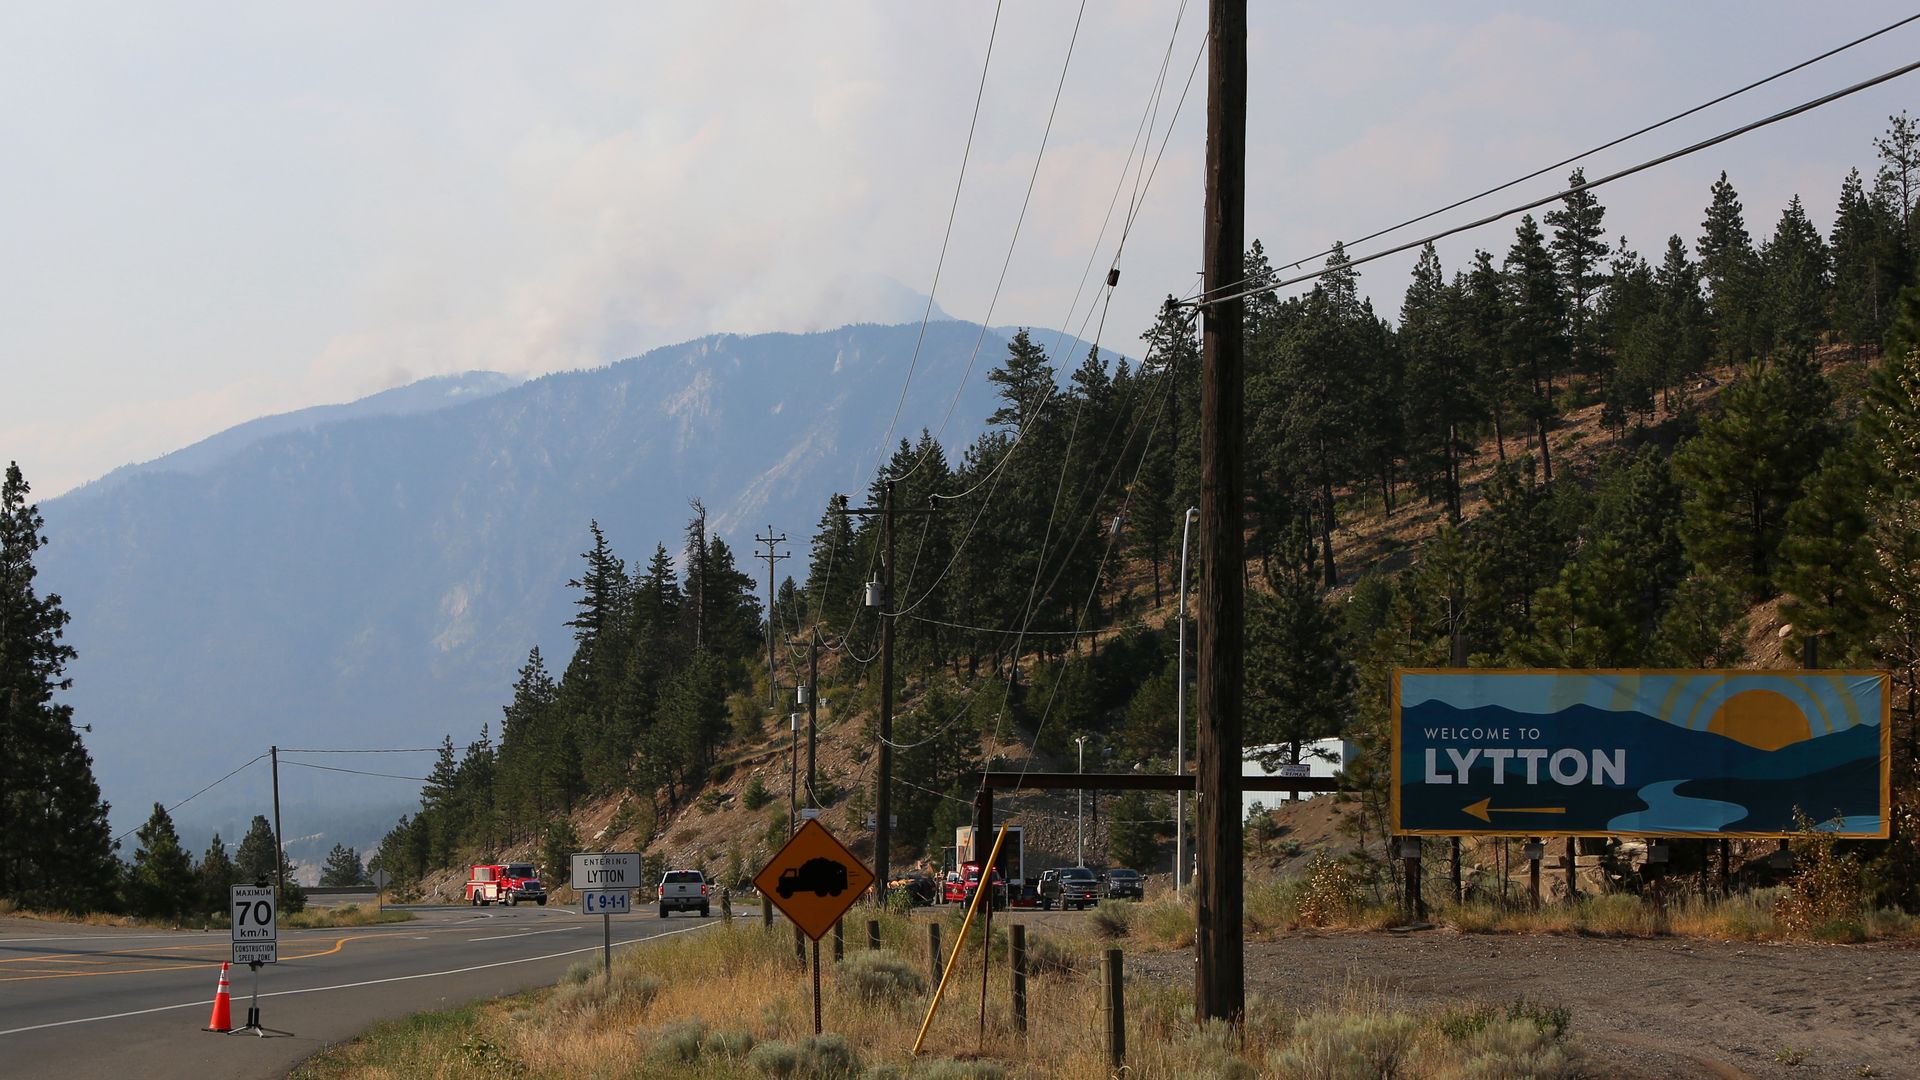 Smoke rises over the mountains in Lytton, as firefighters still battle the fires in British Columbia, July 6